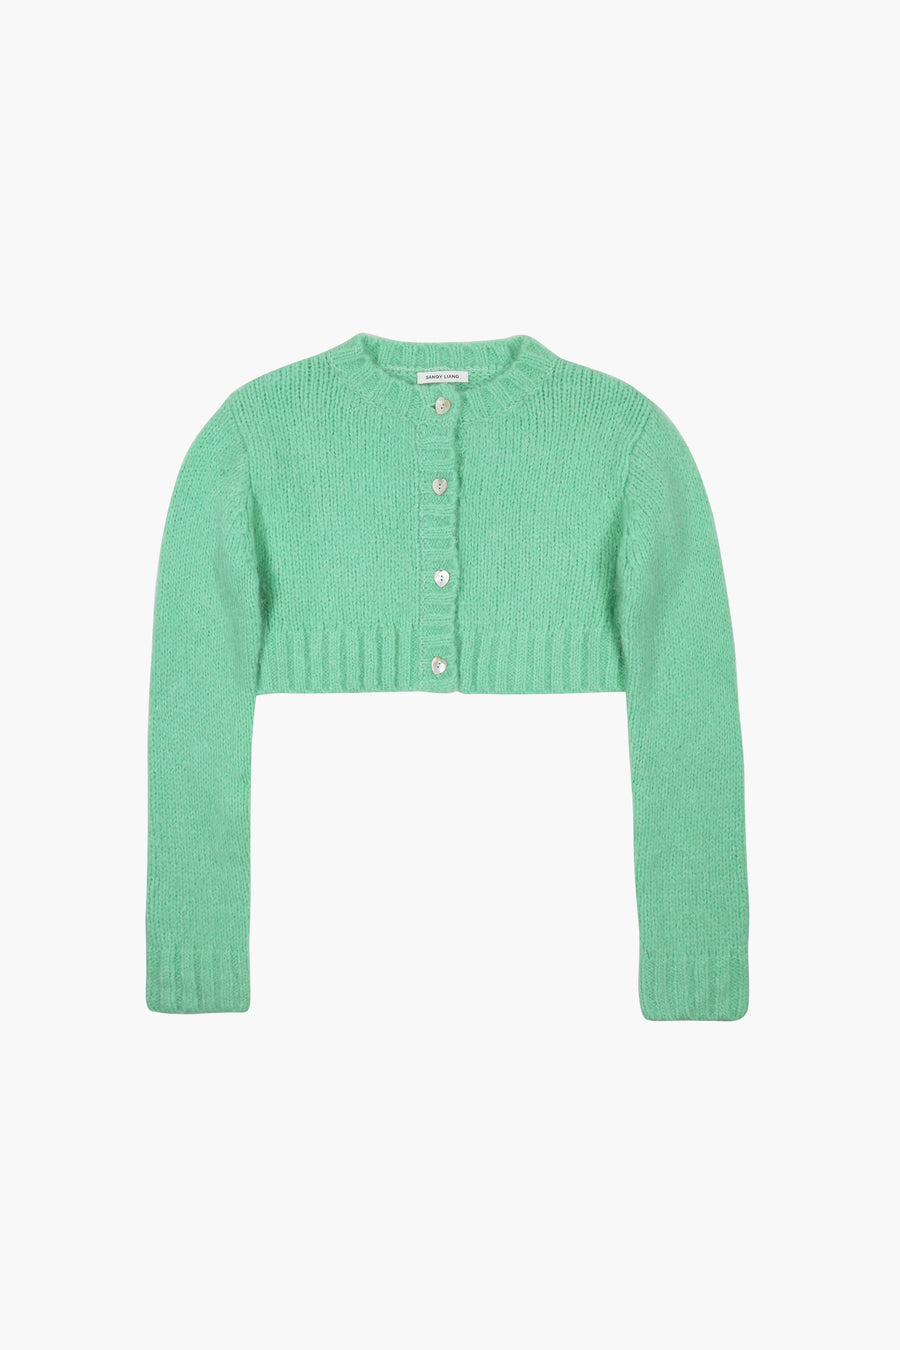 Cropped knit cardigan in lime green with buttons